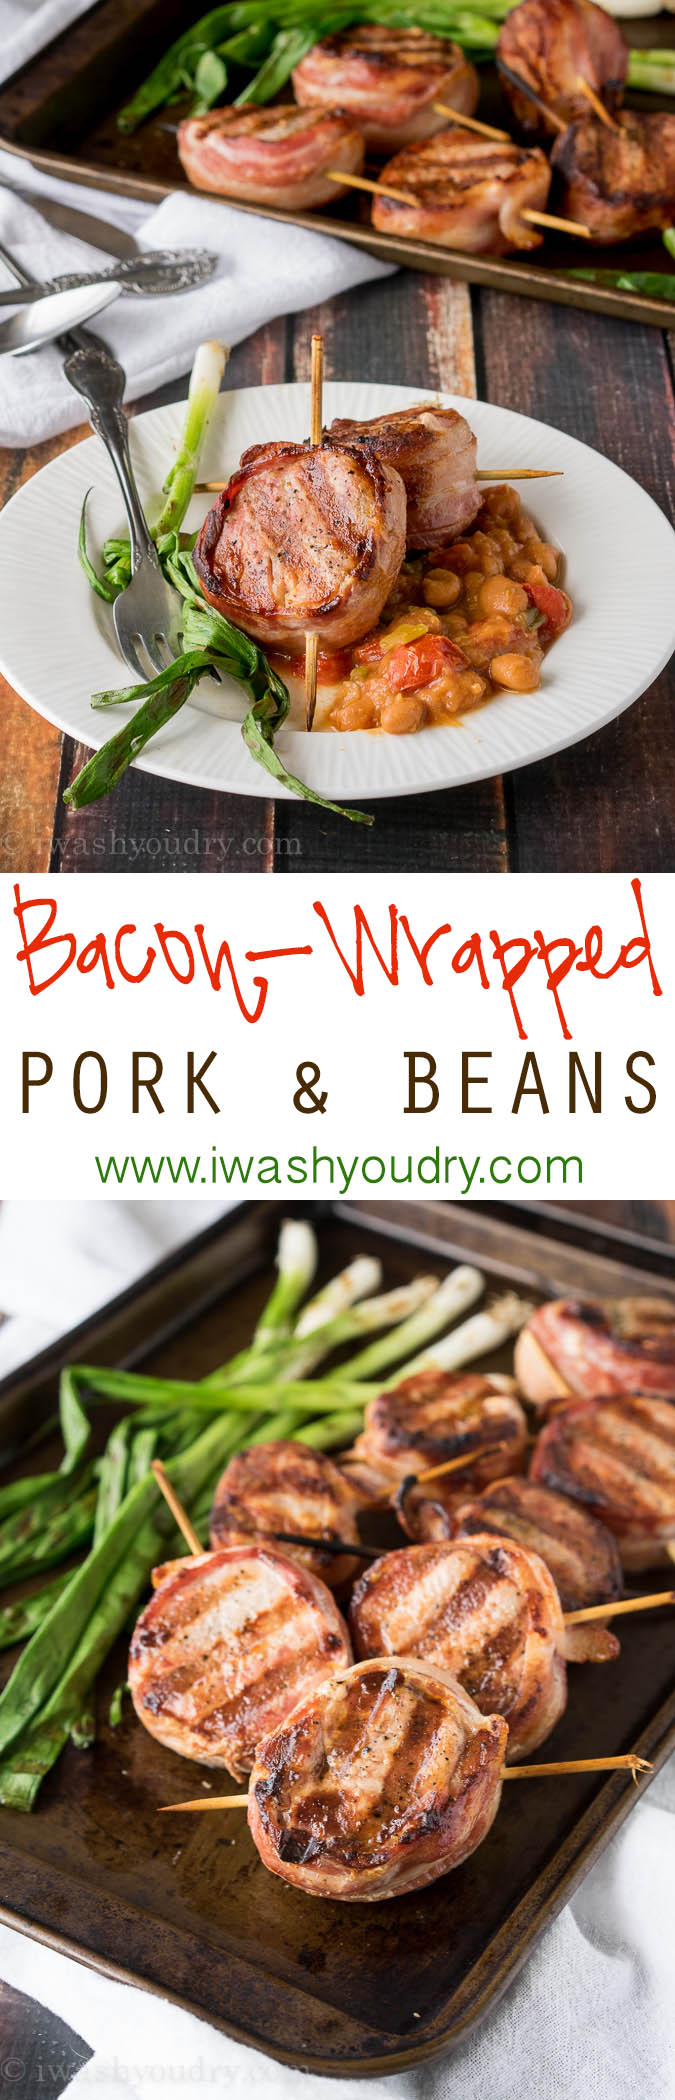 Super easy grilled Bacon-Wrapped Pork and Beans! Ready in just 30 minutes!